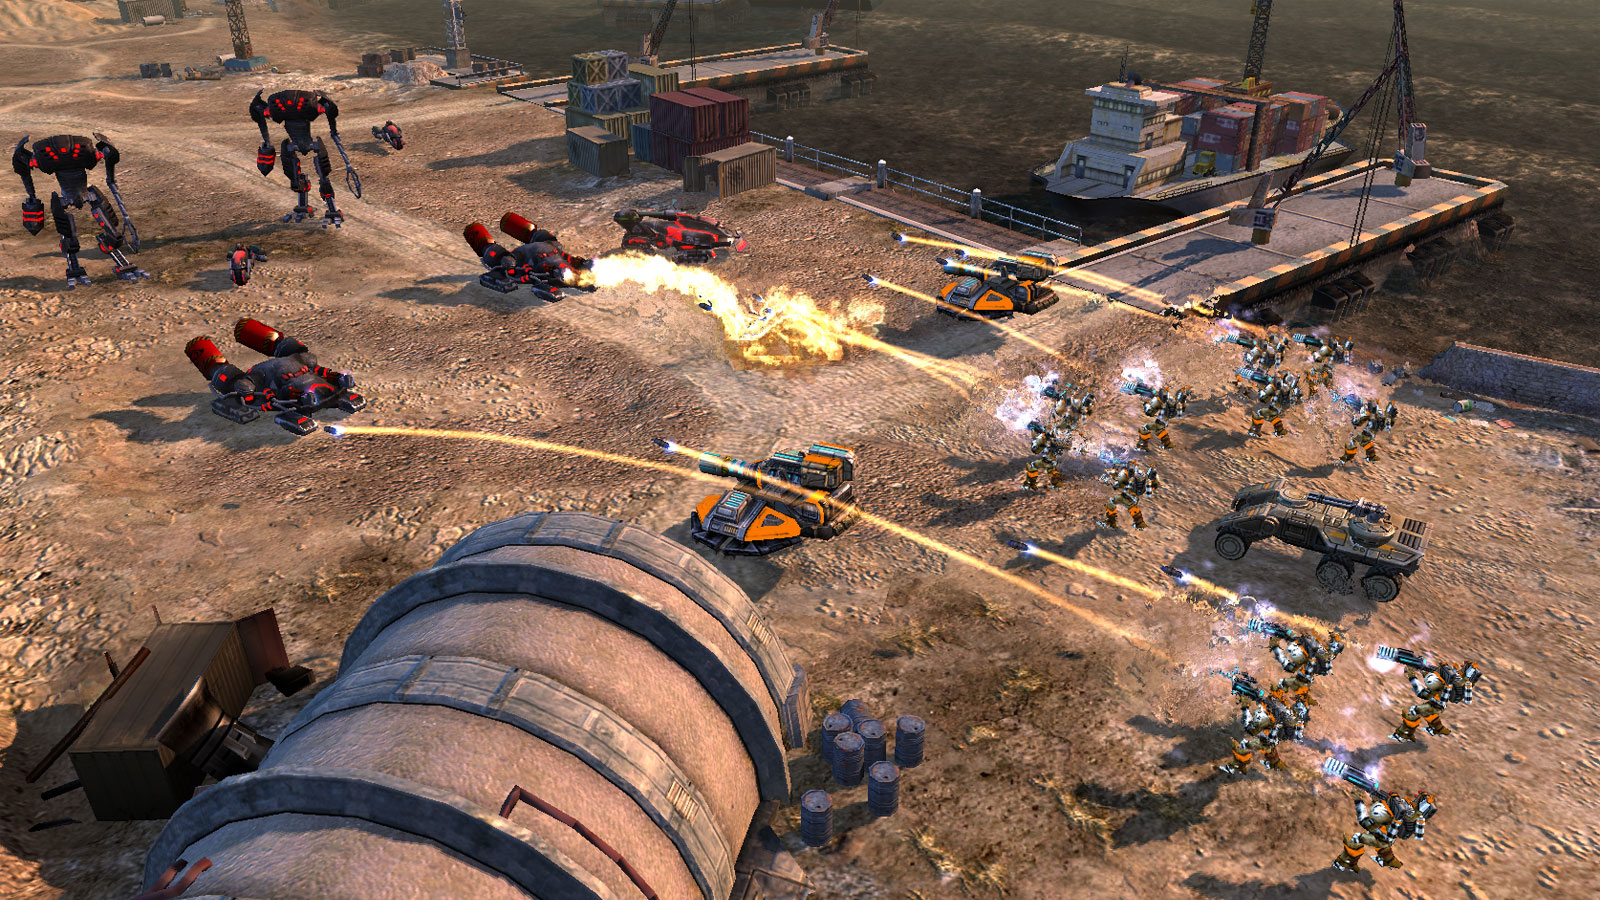 command and conquer 3 kanes wrath camera mod